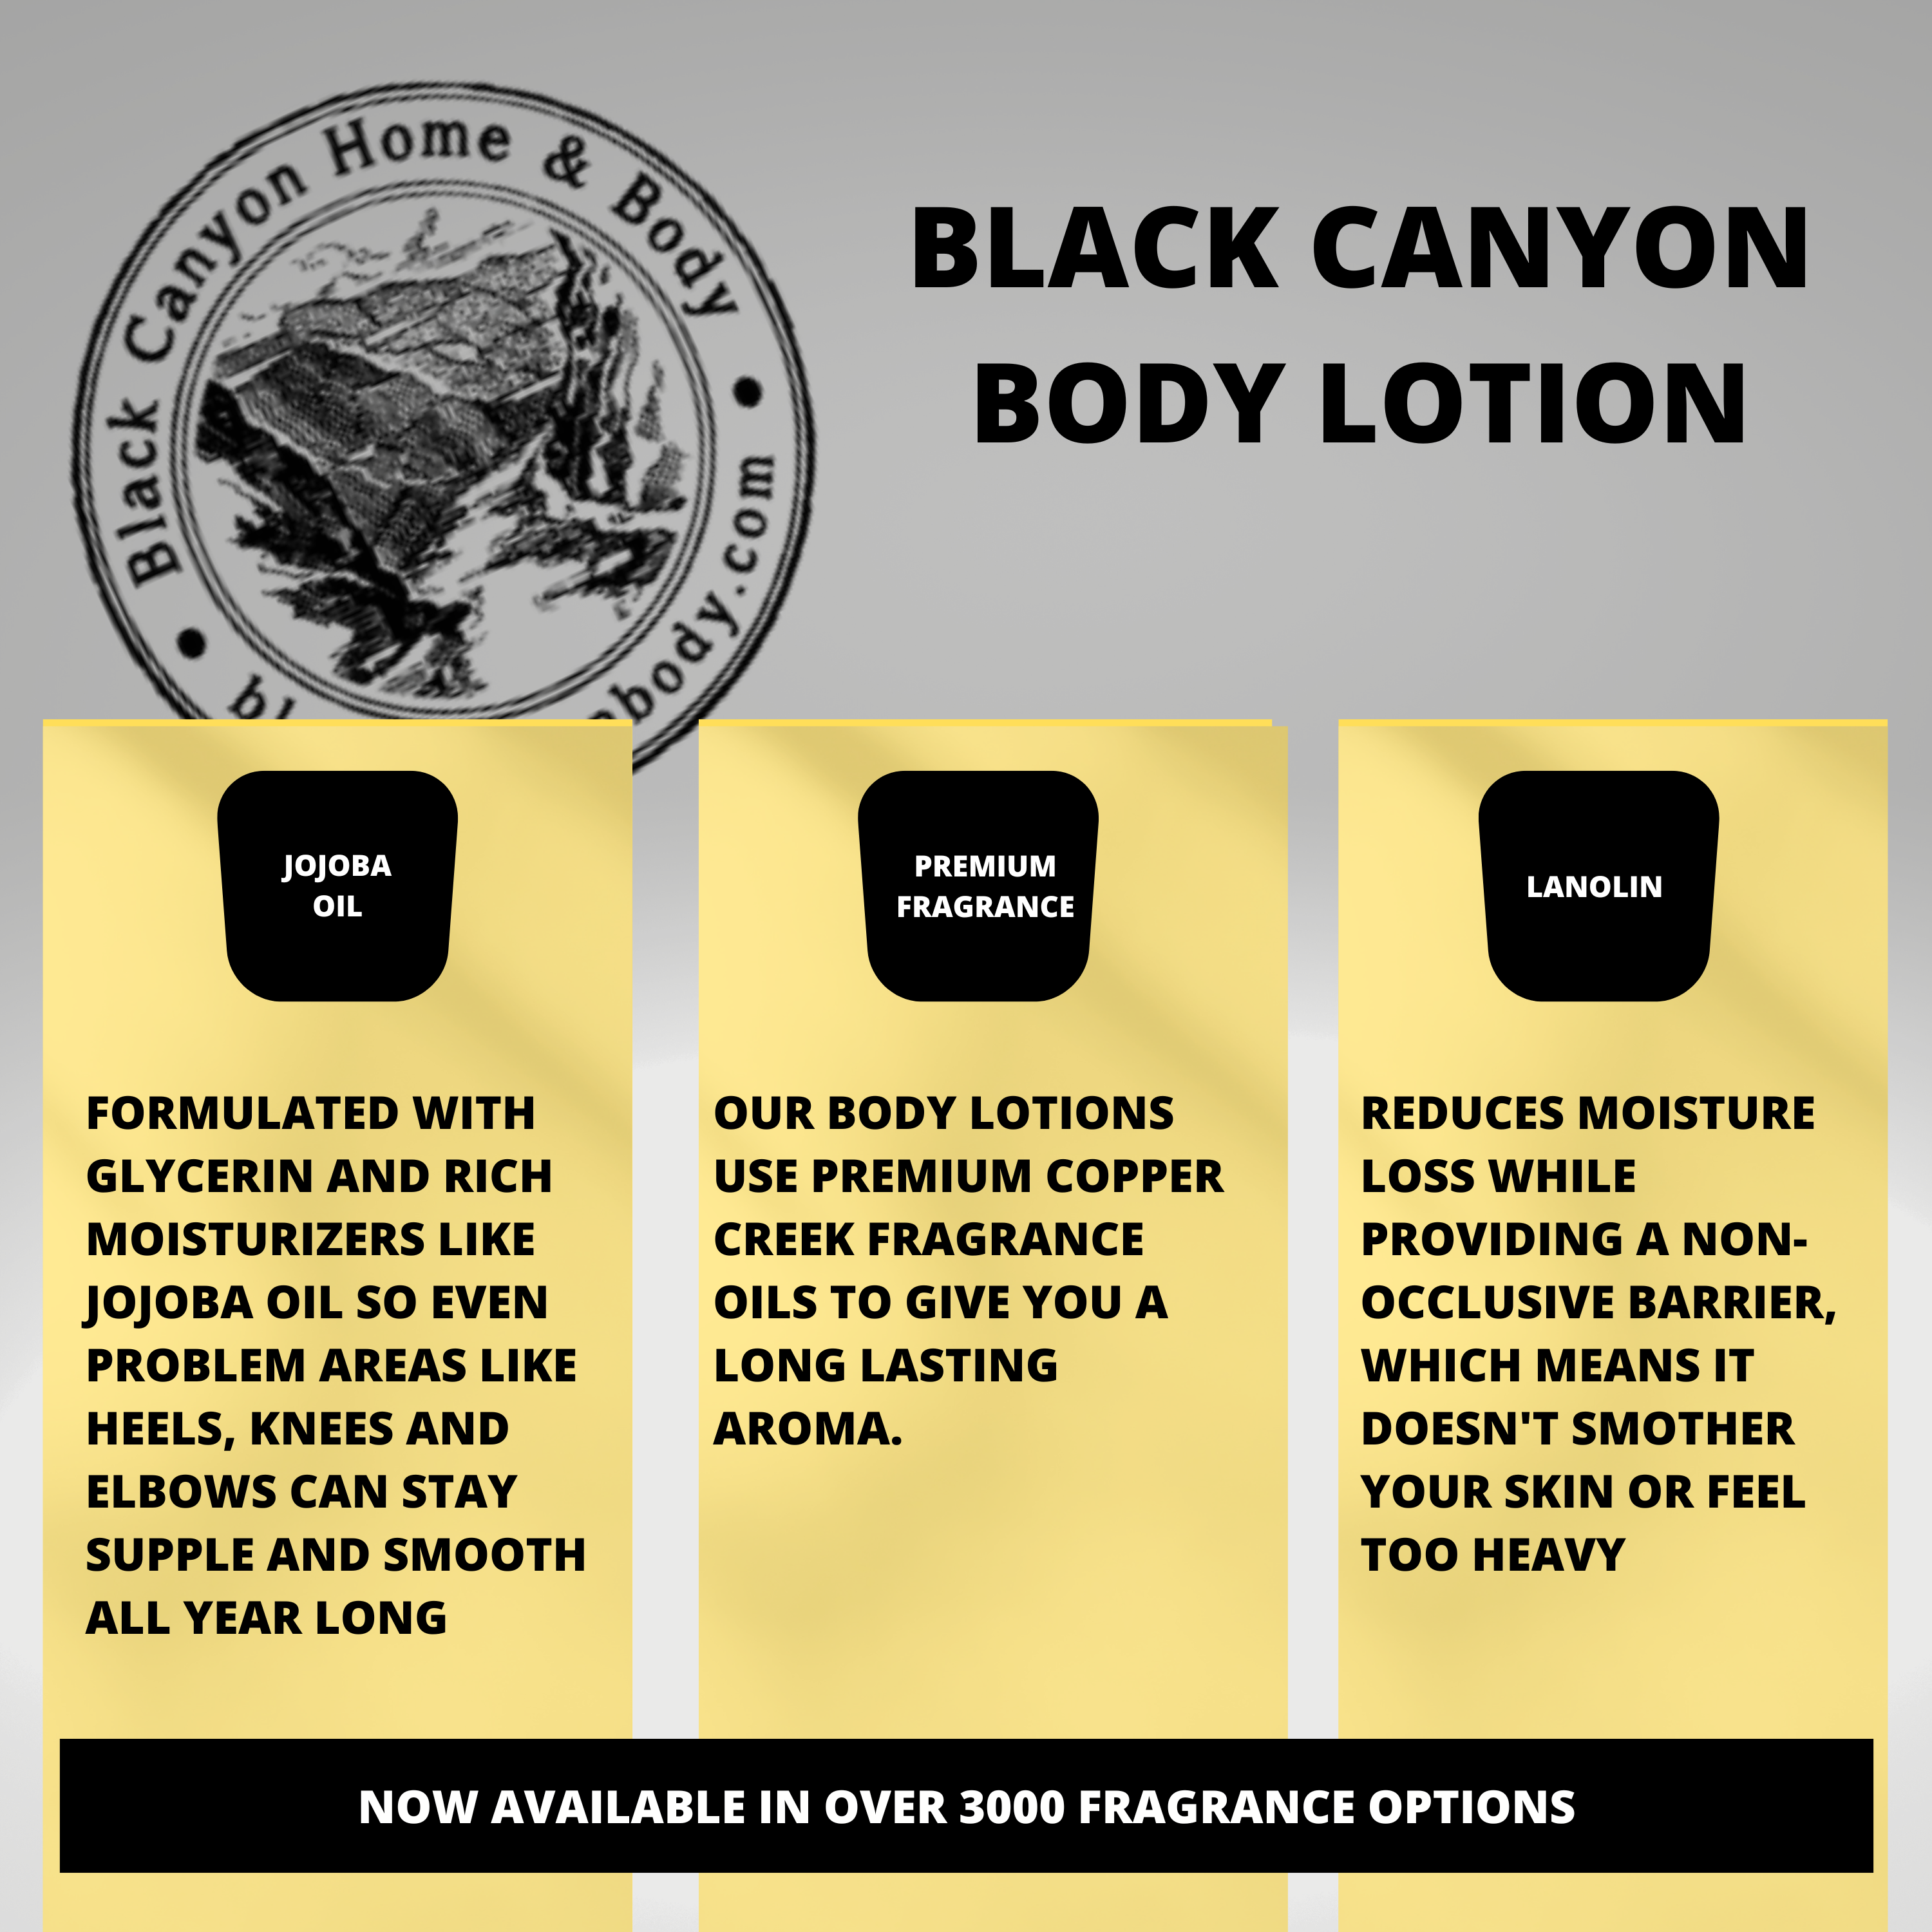 Black Canyon Grape Soda Scented Luxury Body Lotion with Lanolin and Jojoba Oil